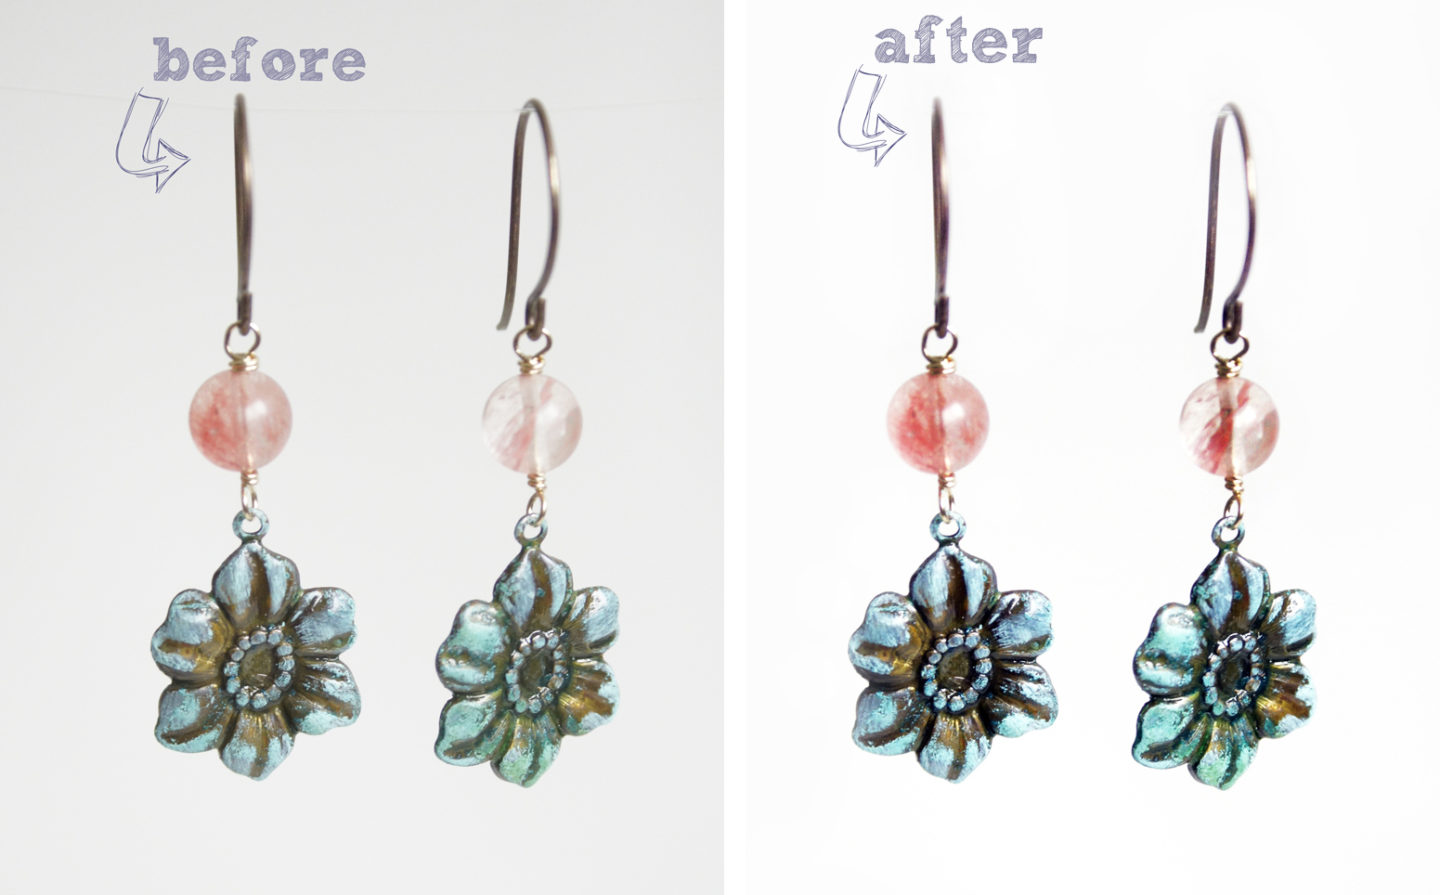 How to re-touch jewelry pictures!